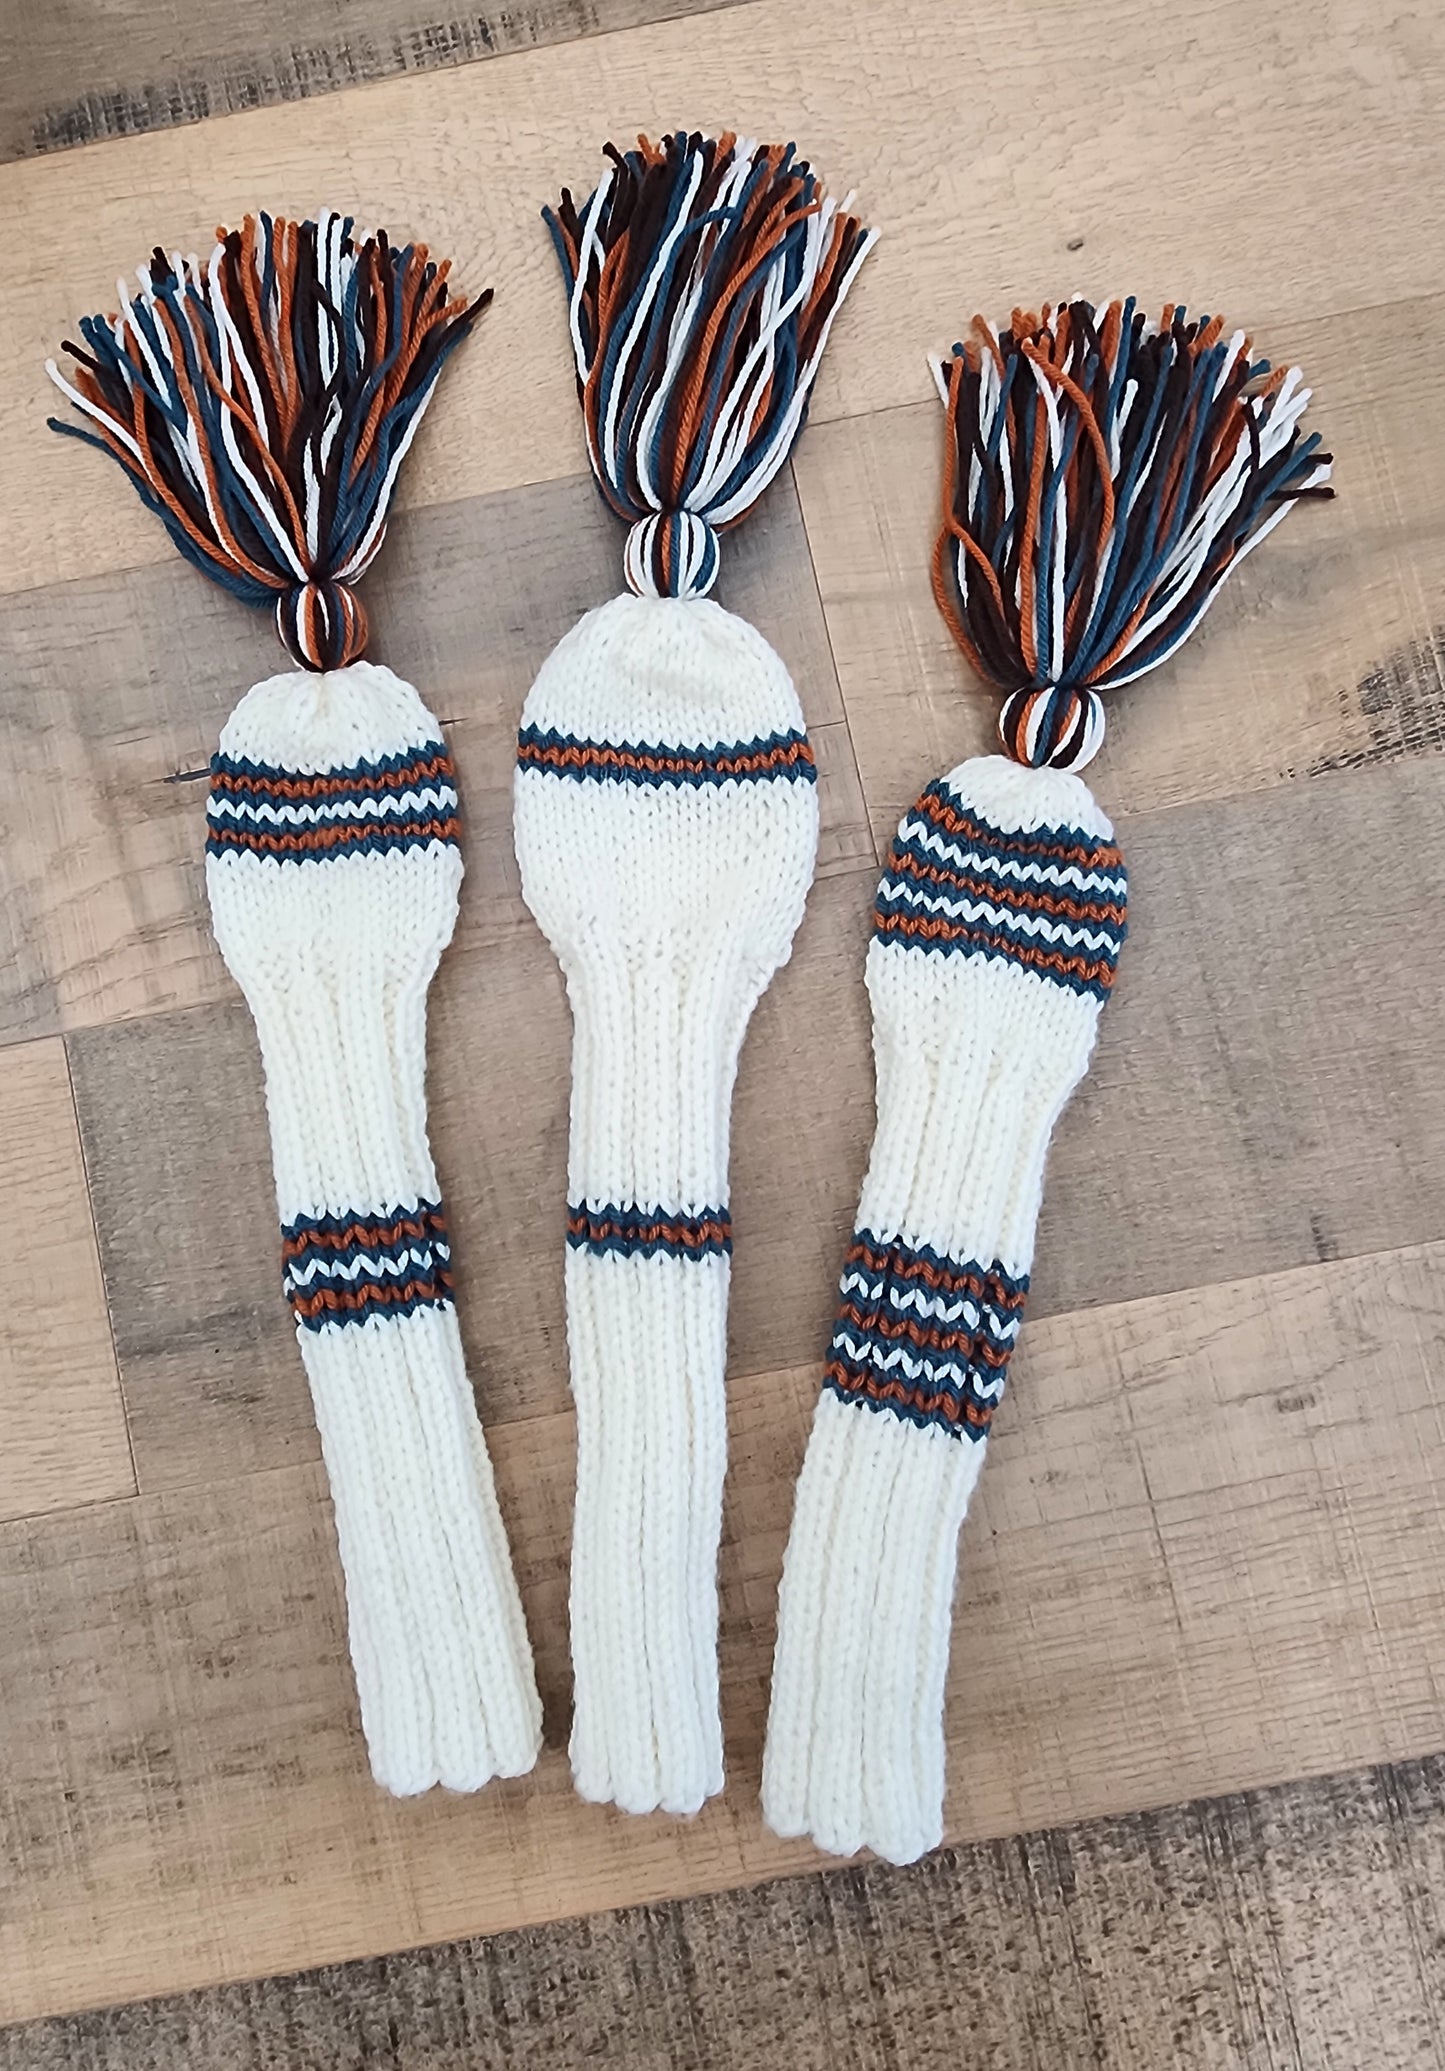 Three Golf Club Head Covers Retro-Vintage Ivory, Dark Teal & Orange with Tassels for Drivers, Woods for Randy